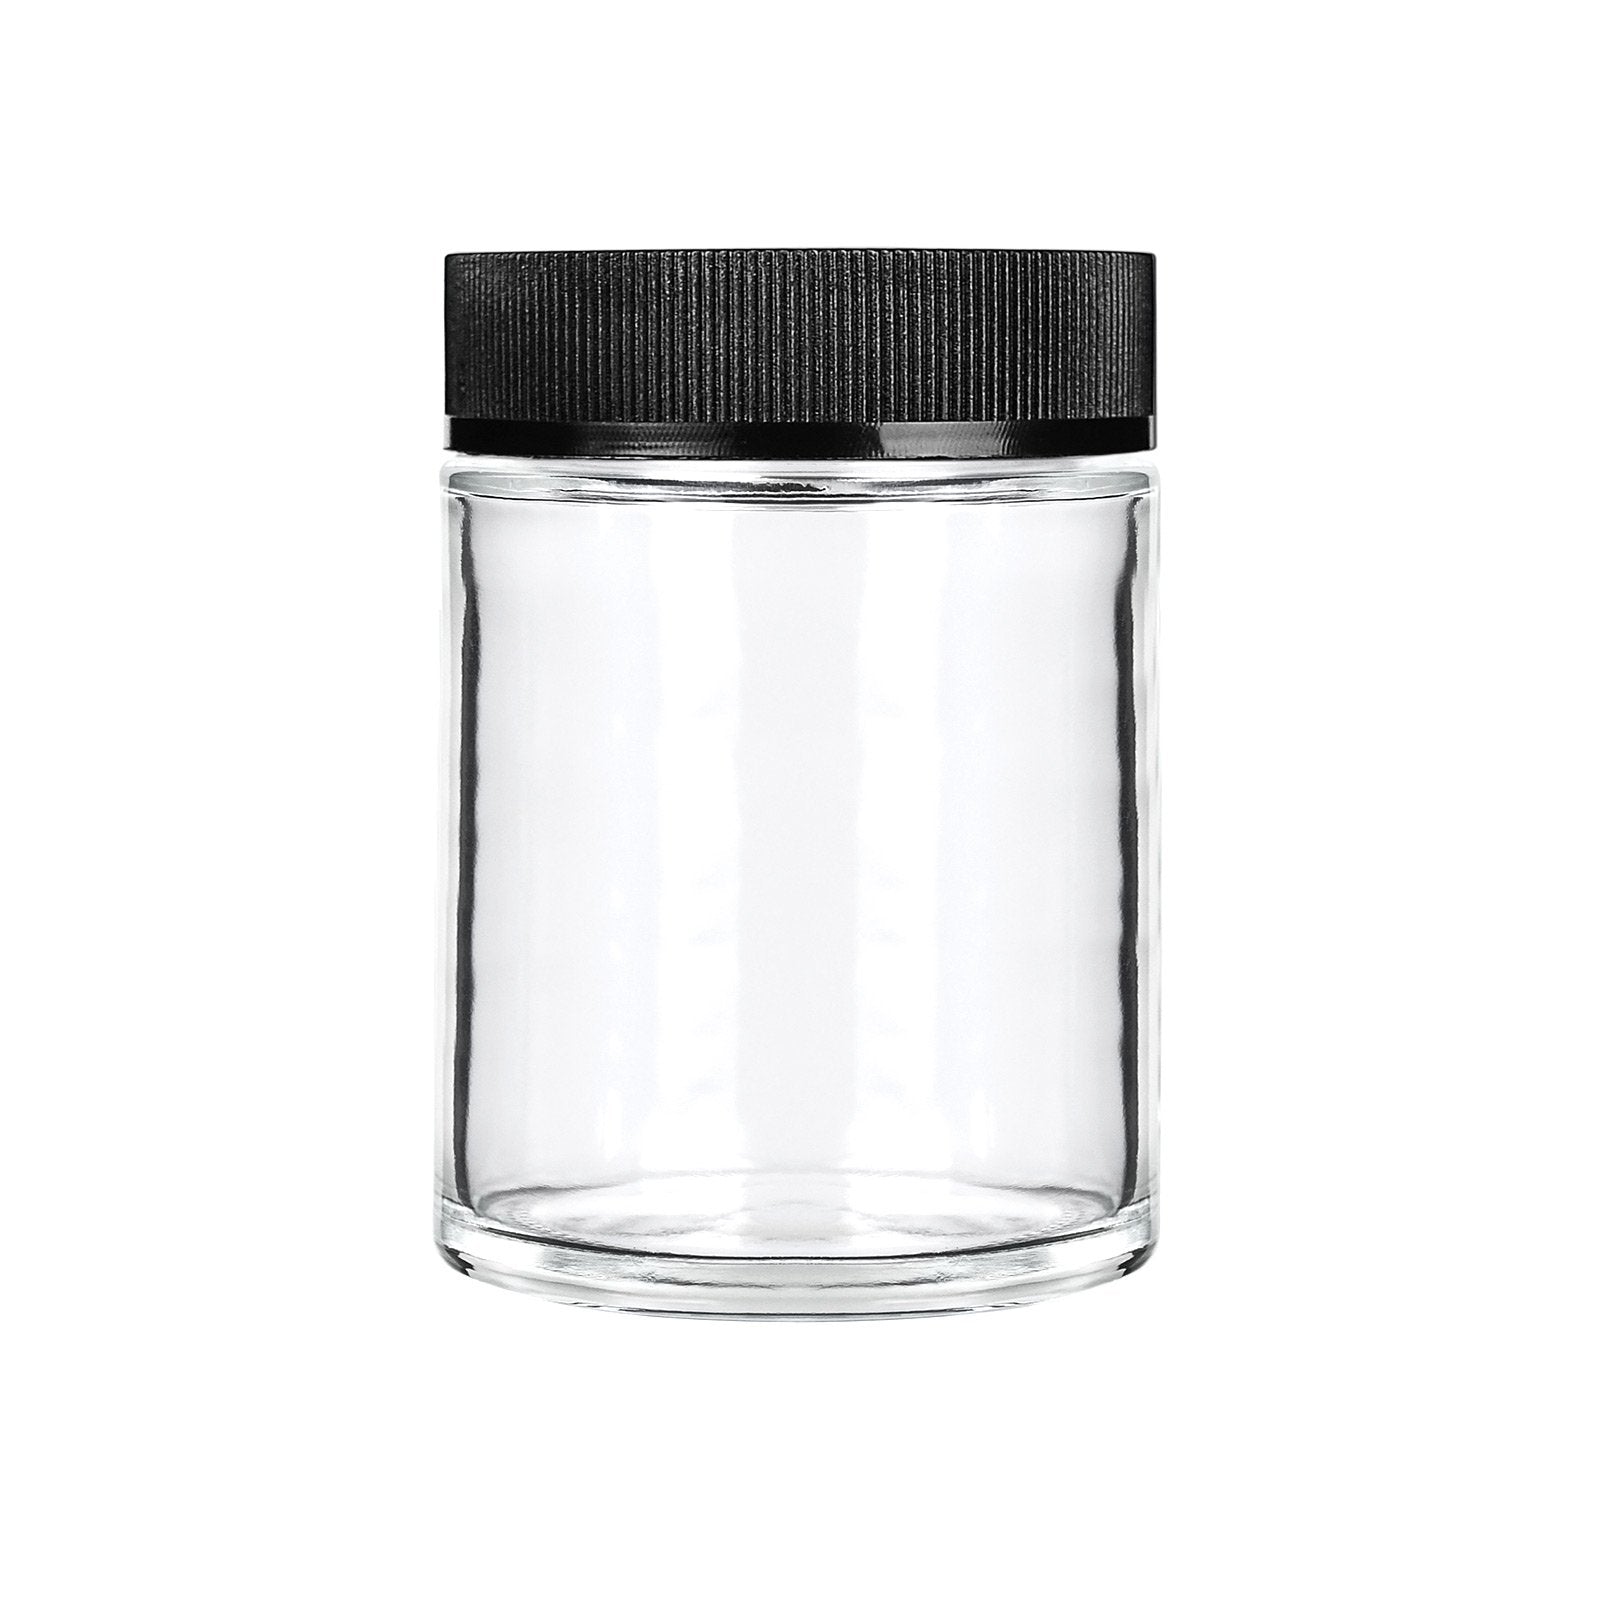 https://cdn.shopify.com/s/files/1/0158/8418/9744/products/4oz-child-resistant-glass-jars-with-black-caps-7-grams-100-count-flower-power-packages-478428.jpg?v=1601410719